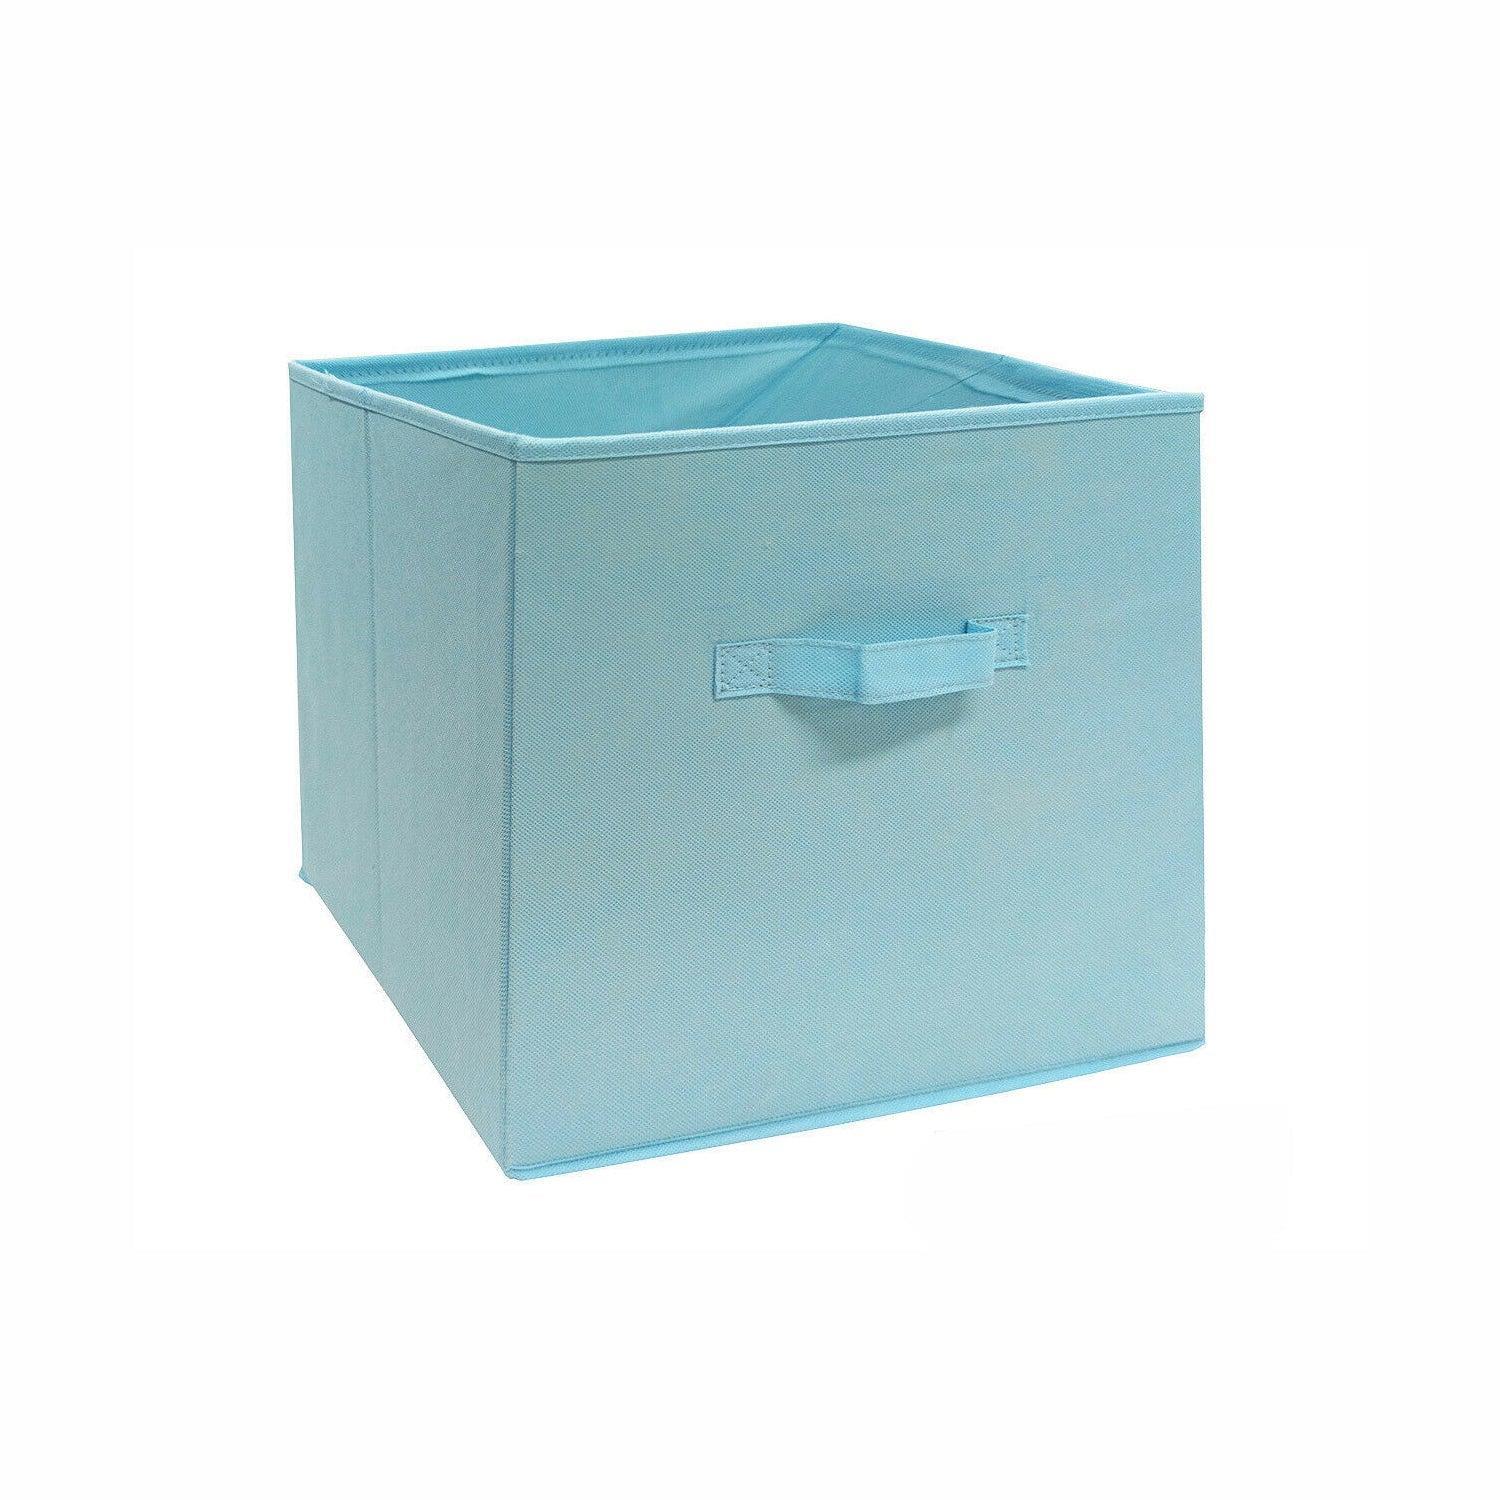 Foldable Folding Storage Cube Storage Box Fabric Organiser Available in 10 Colours